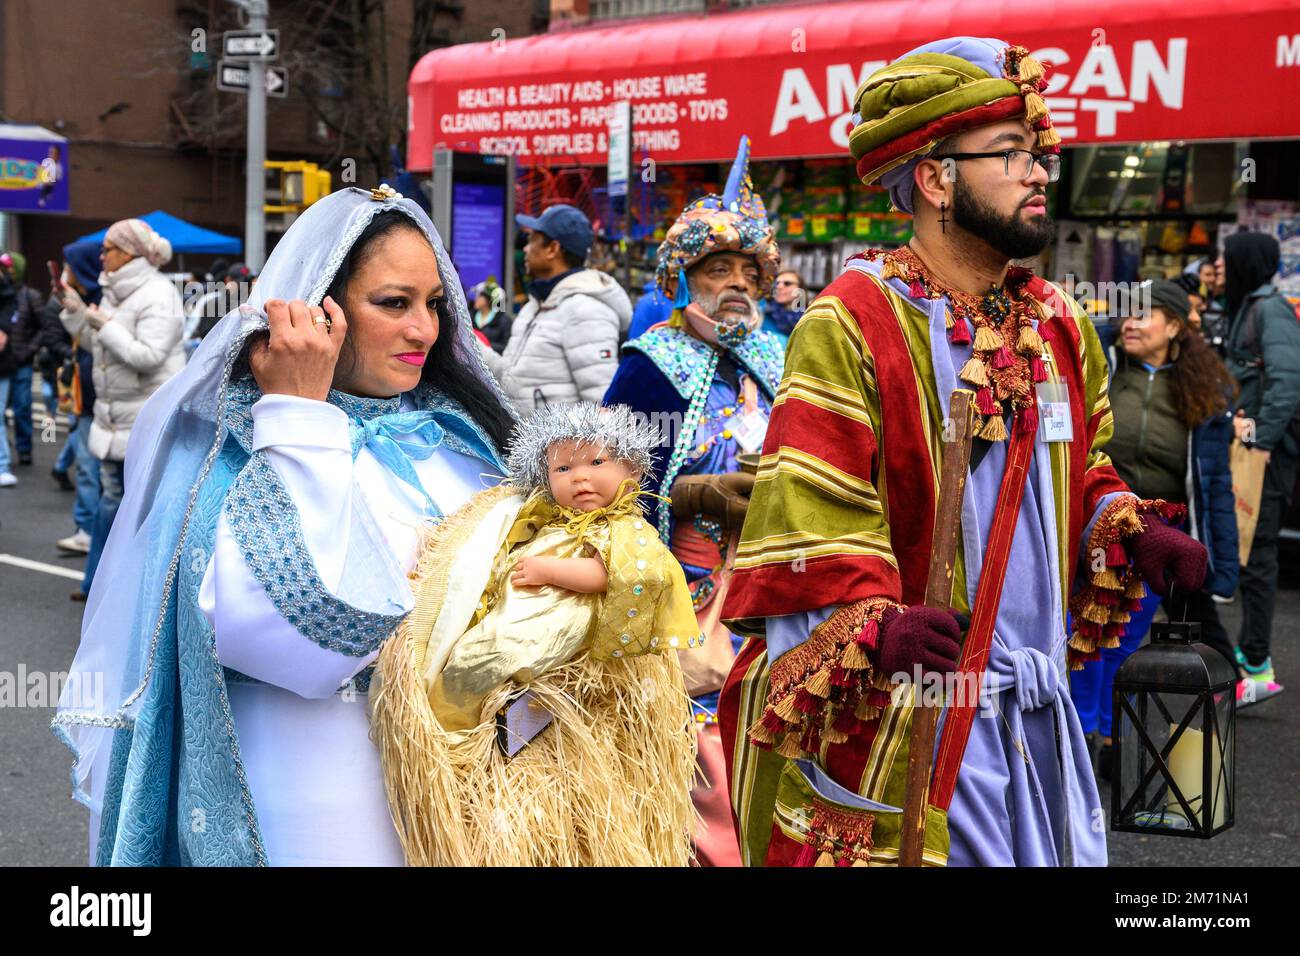 New York, USA. 6th Jan, 2023. Participants dressed as the Virgin Mary, Joseph and Melchior de Wise Man walk the streets in East Harlem during the 46th annual Three Kings Day Parade organized by El Museo del Barrio. The traditional Spanish celebration was held in person for the first time since the start of the coronavirus (COVID-19) pandemic. The theme for this year was: 'Entre Familia: Mental Health & Wellness of our Communities' focusing on the importance of mental health and wellness. Credit: Enrique Shore/Alamy Live News Stock Photo